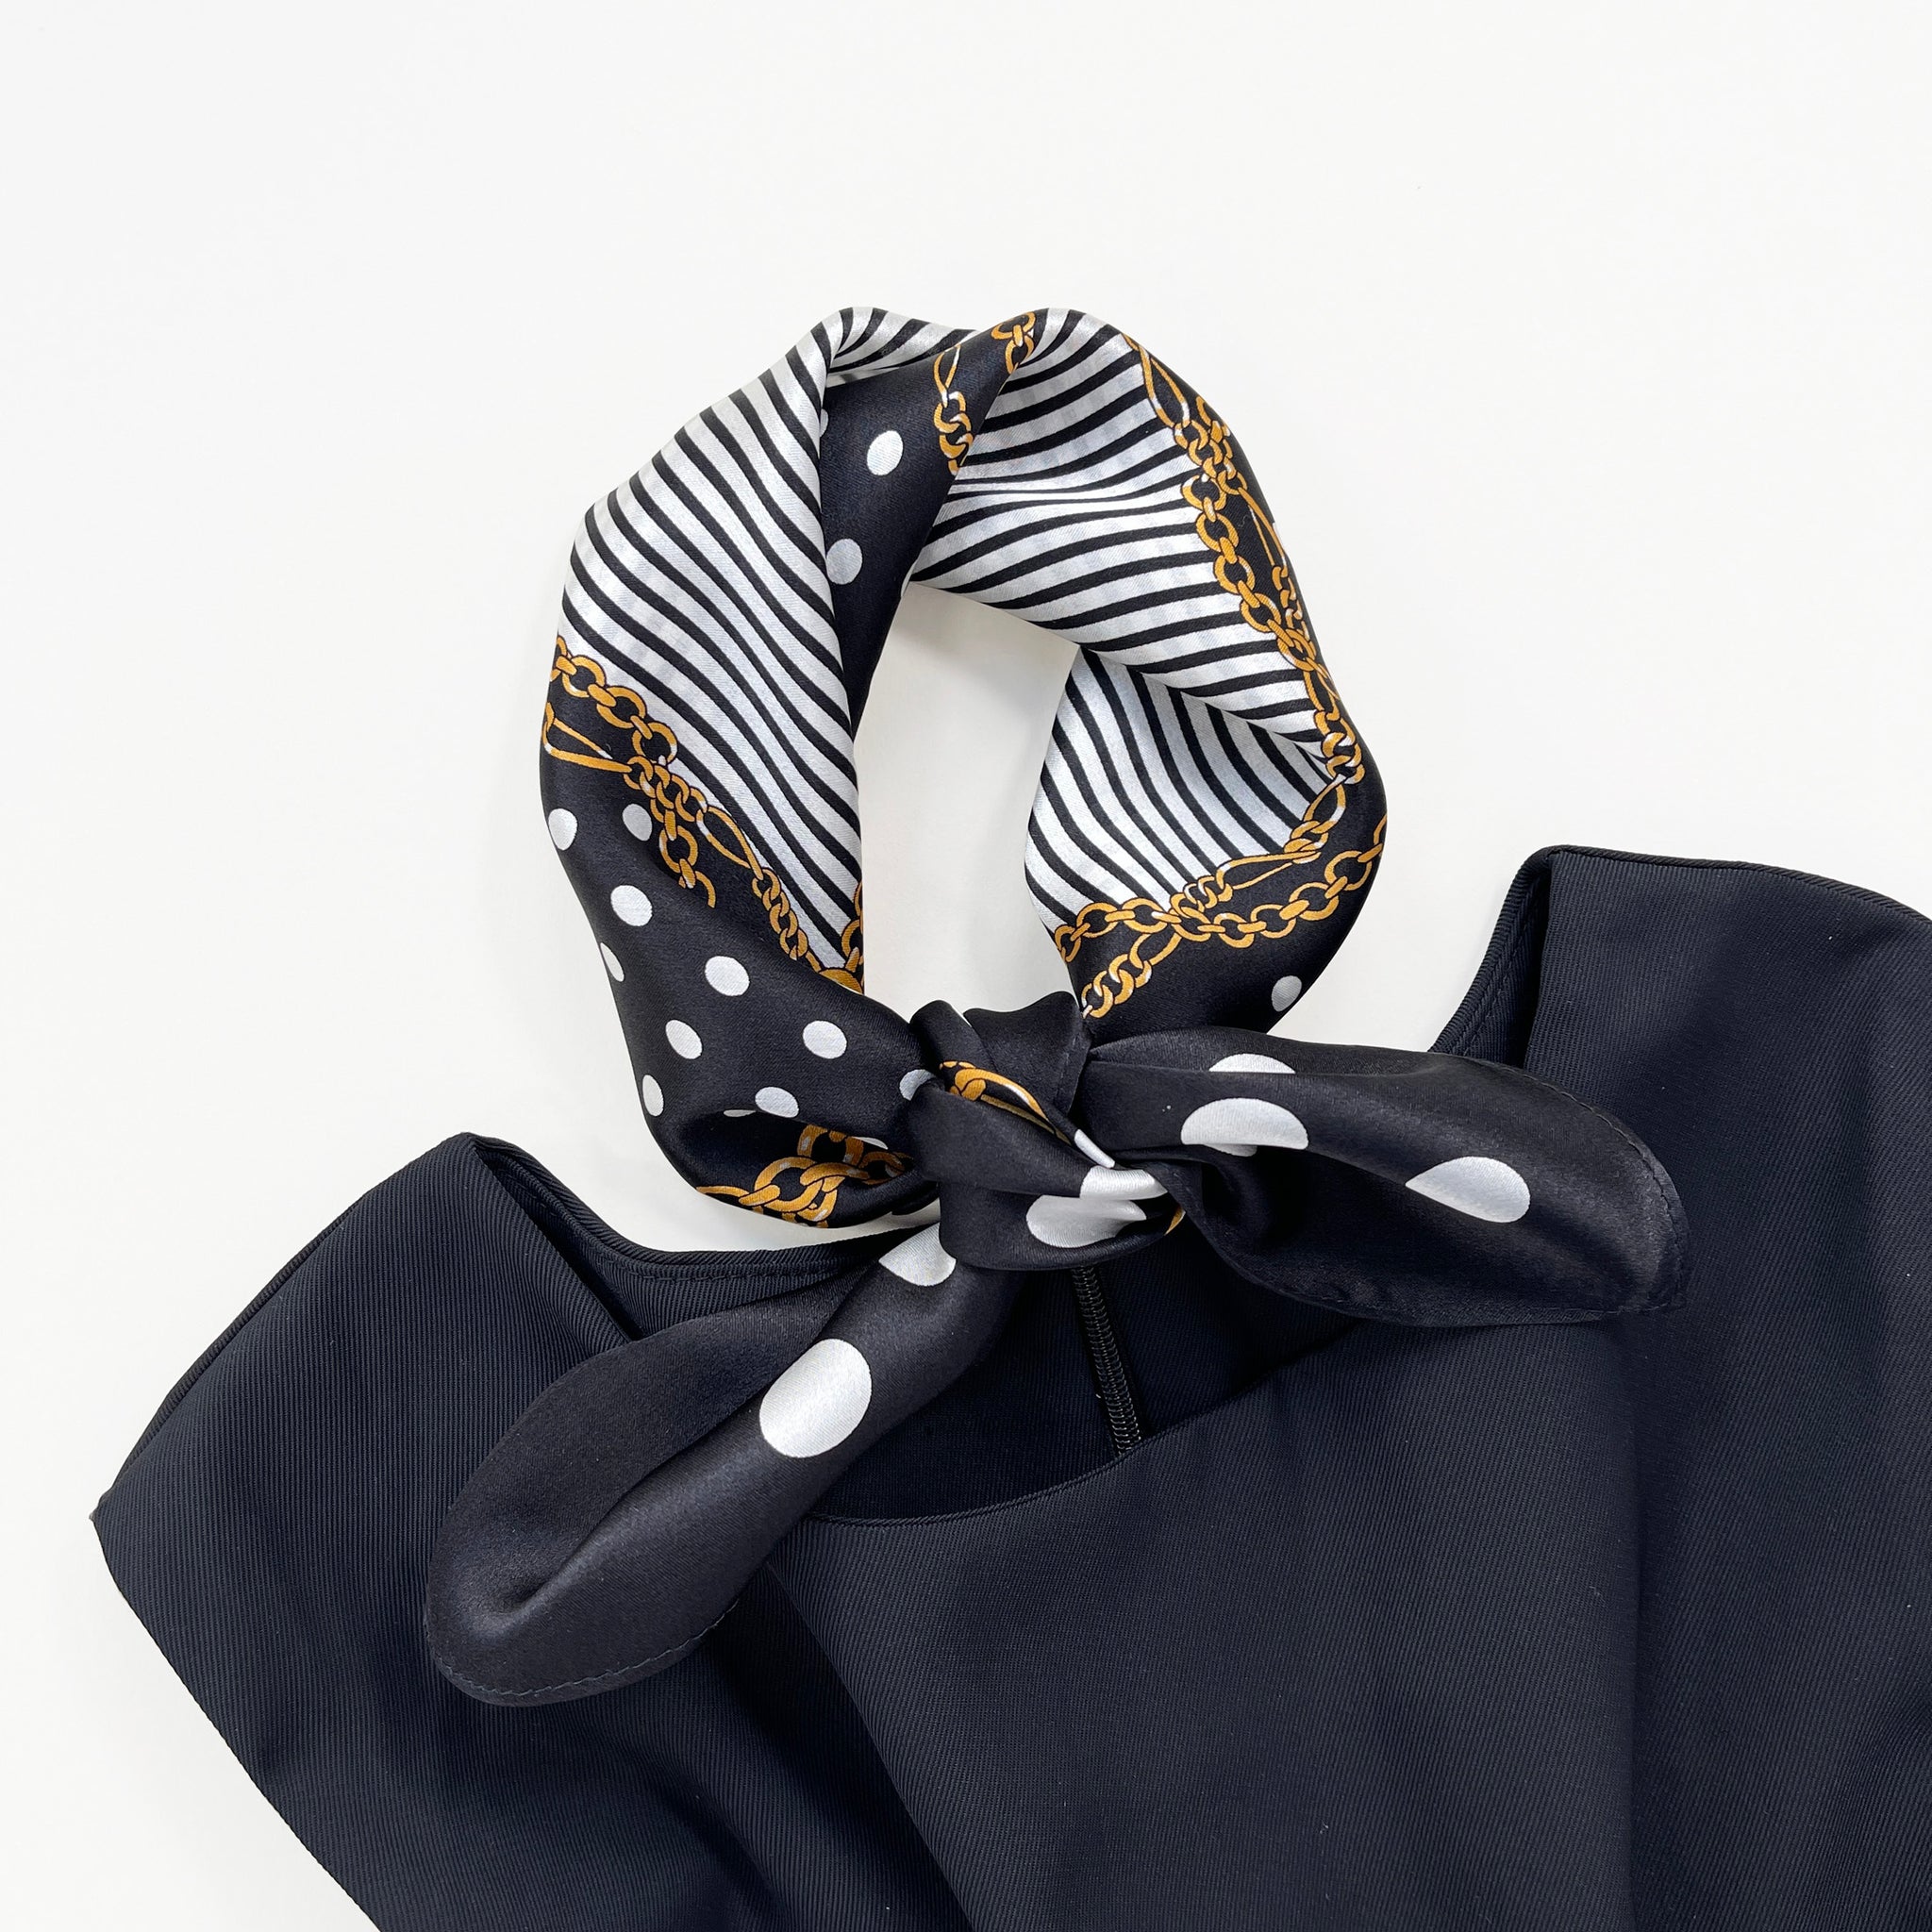 a small square silk scarf for women featuring polka dot and stripe print in black and white palette knotted as a neckerchief paired with a sleeveless black dress